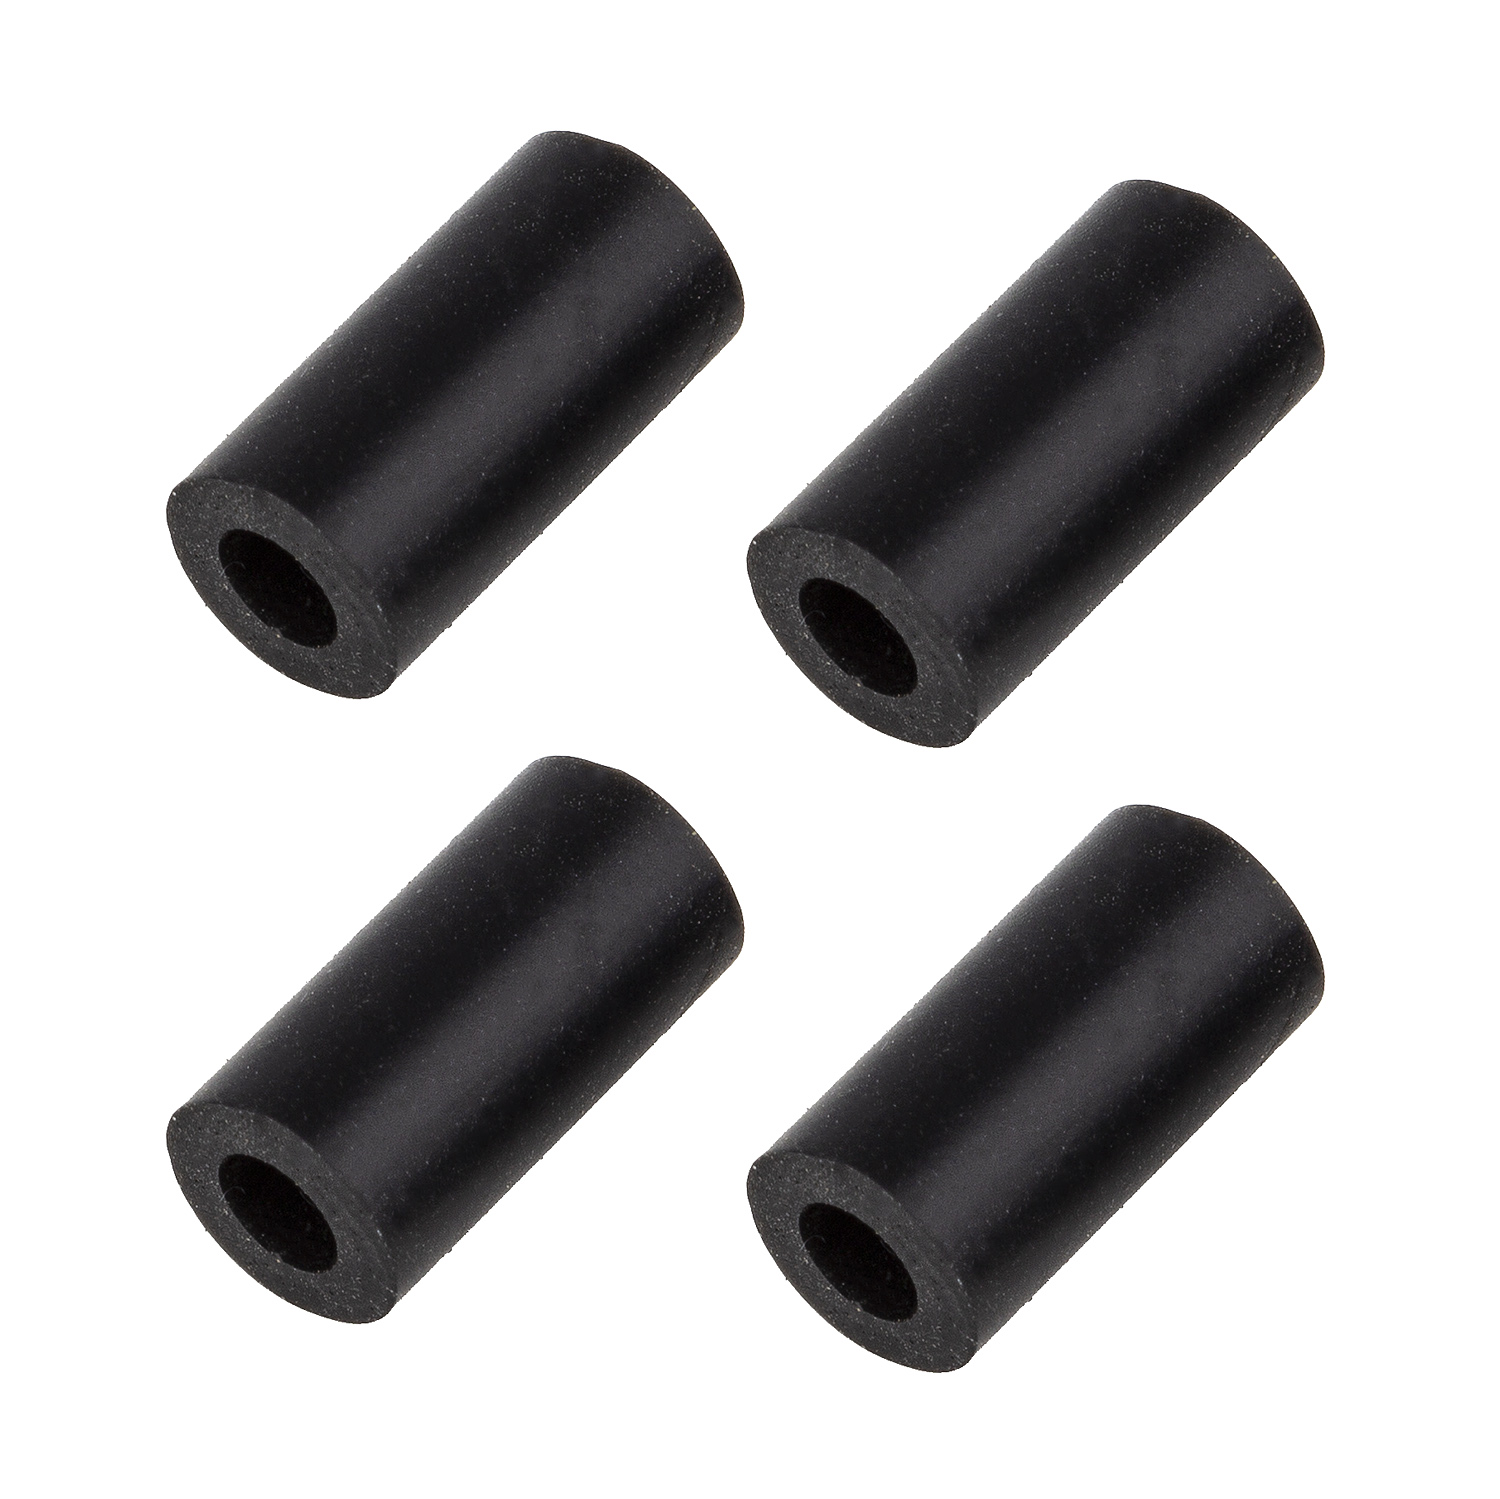 DR10 Up-Travel Shock Spacers, 12mm